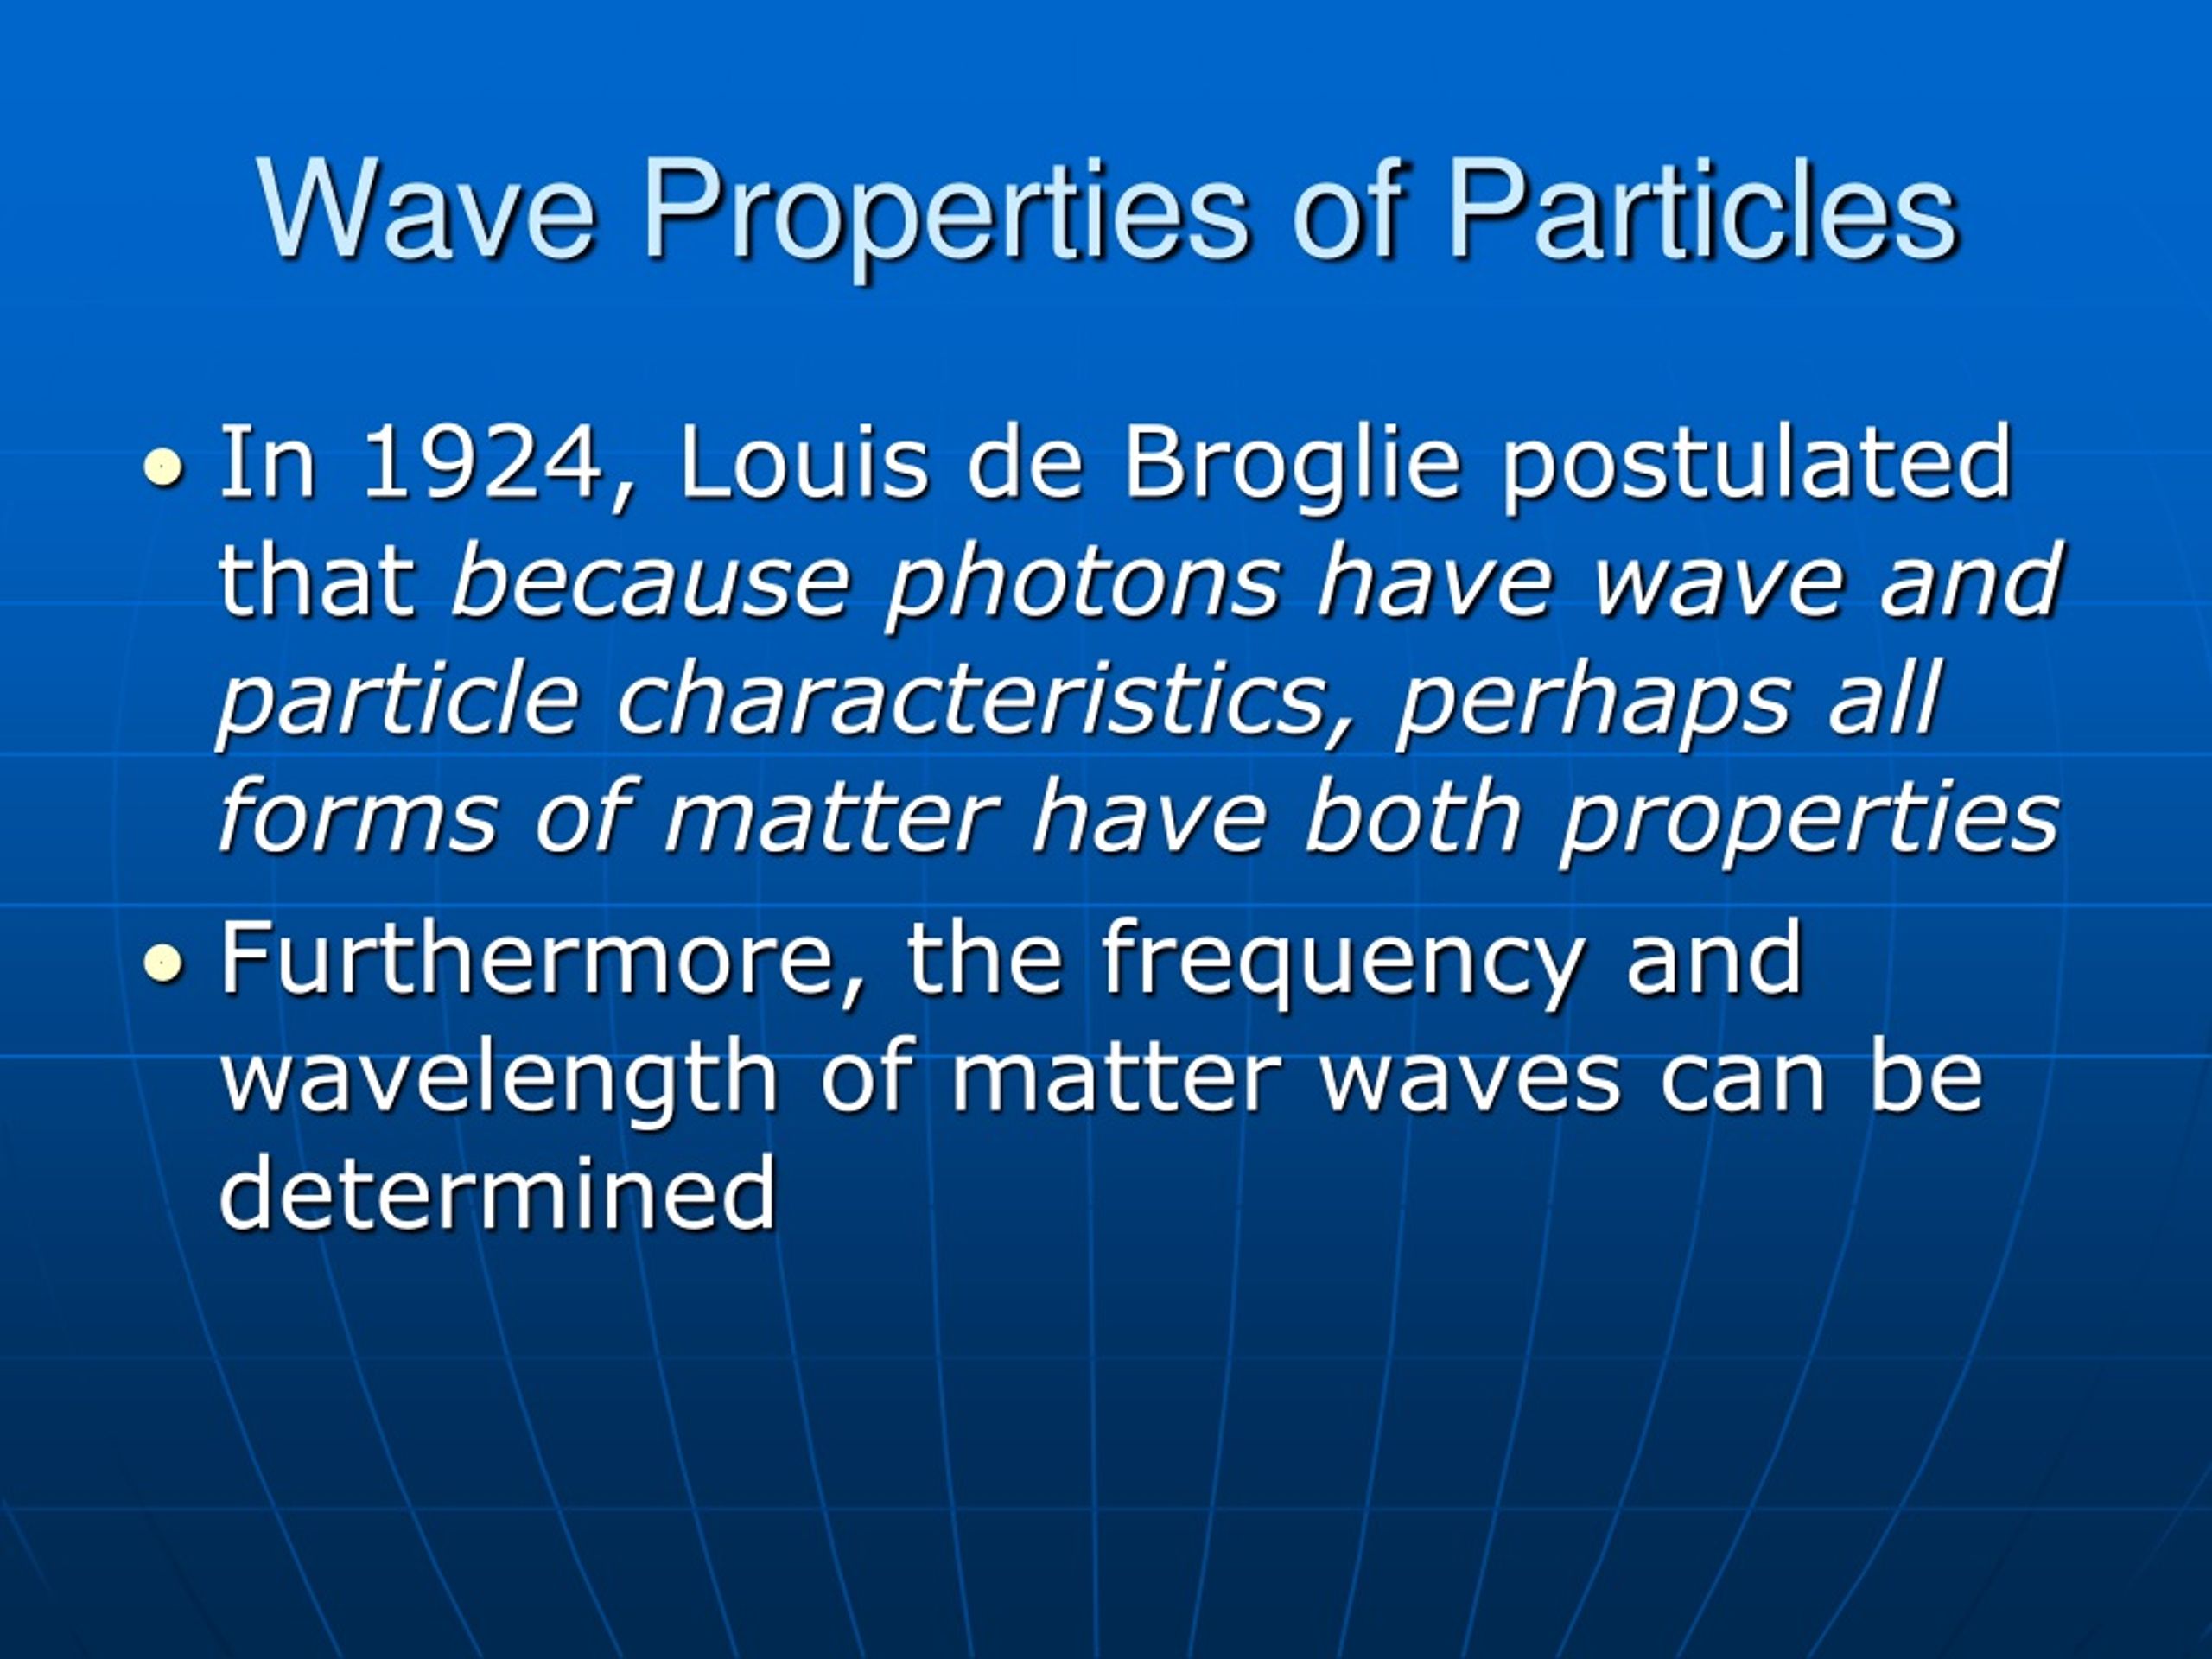 Overview of Particles and Particle Properties